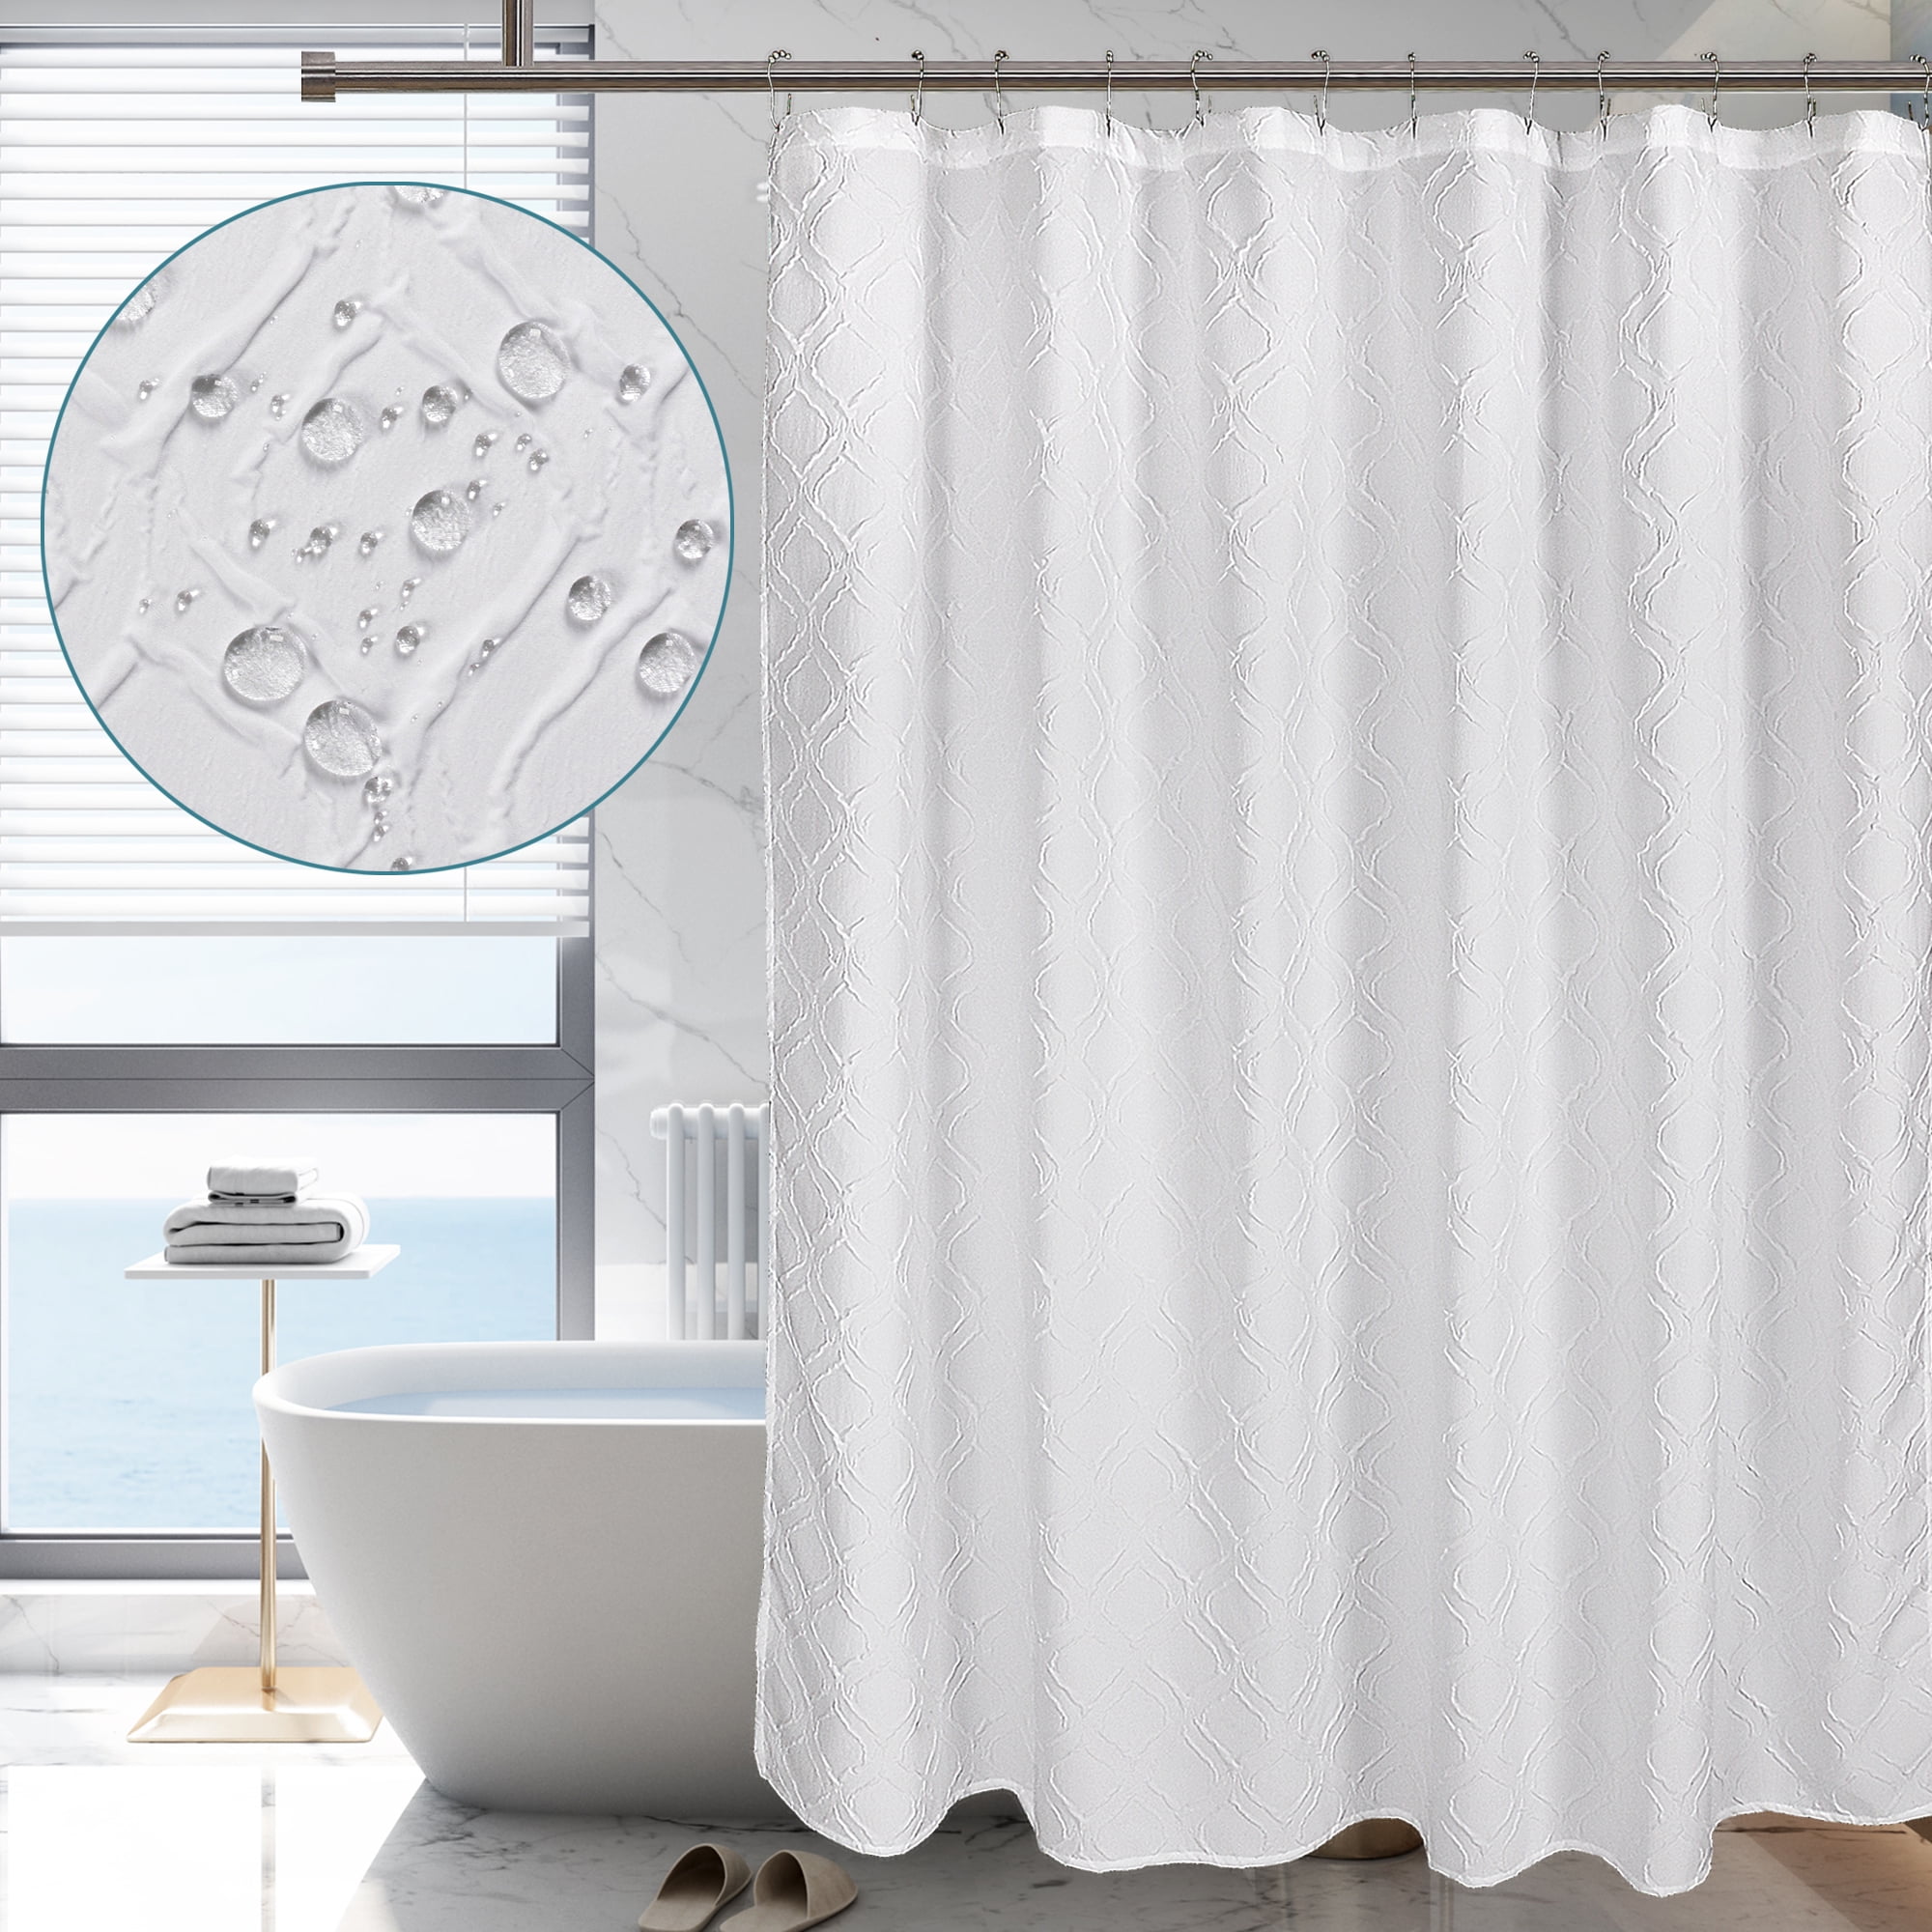 Ovzme White Boho Shower Curtain 72 Inches Length Embossed Water Repellent Geometric Textured Soft Fabric Curtains For Bathroom Hotel Decor Embossment Bath X72 Com